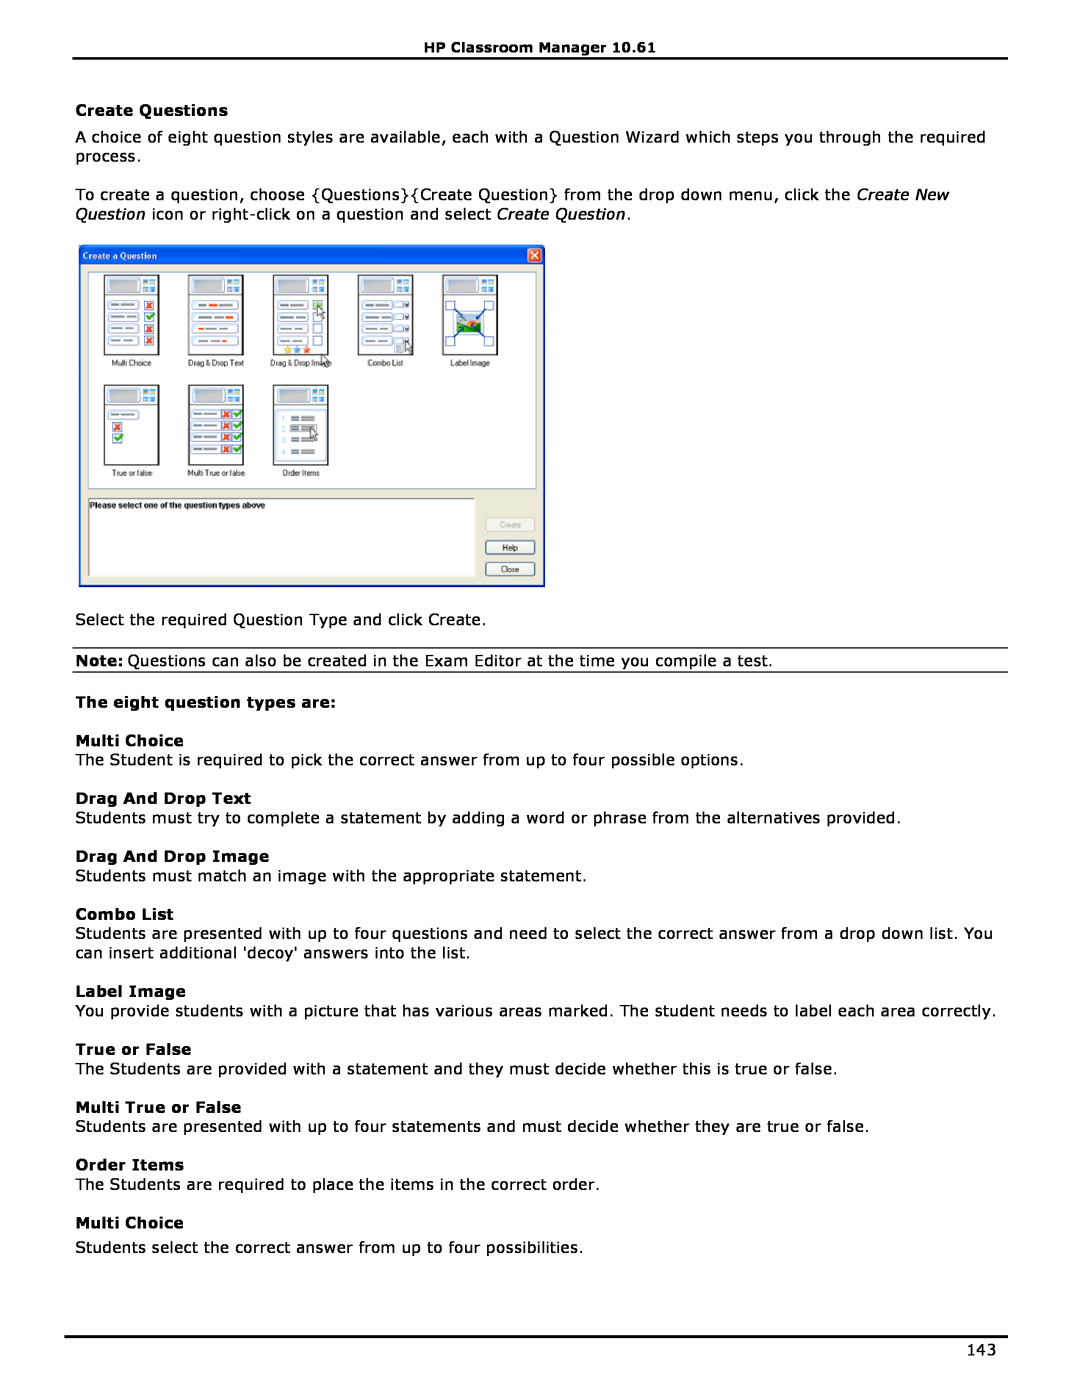 HP Classroom Manager Create Questions, The eight question types are Multi Choice, Drag And Drop Text, Drag And Drop Image 